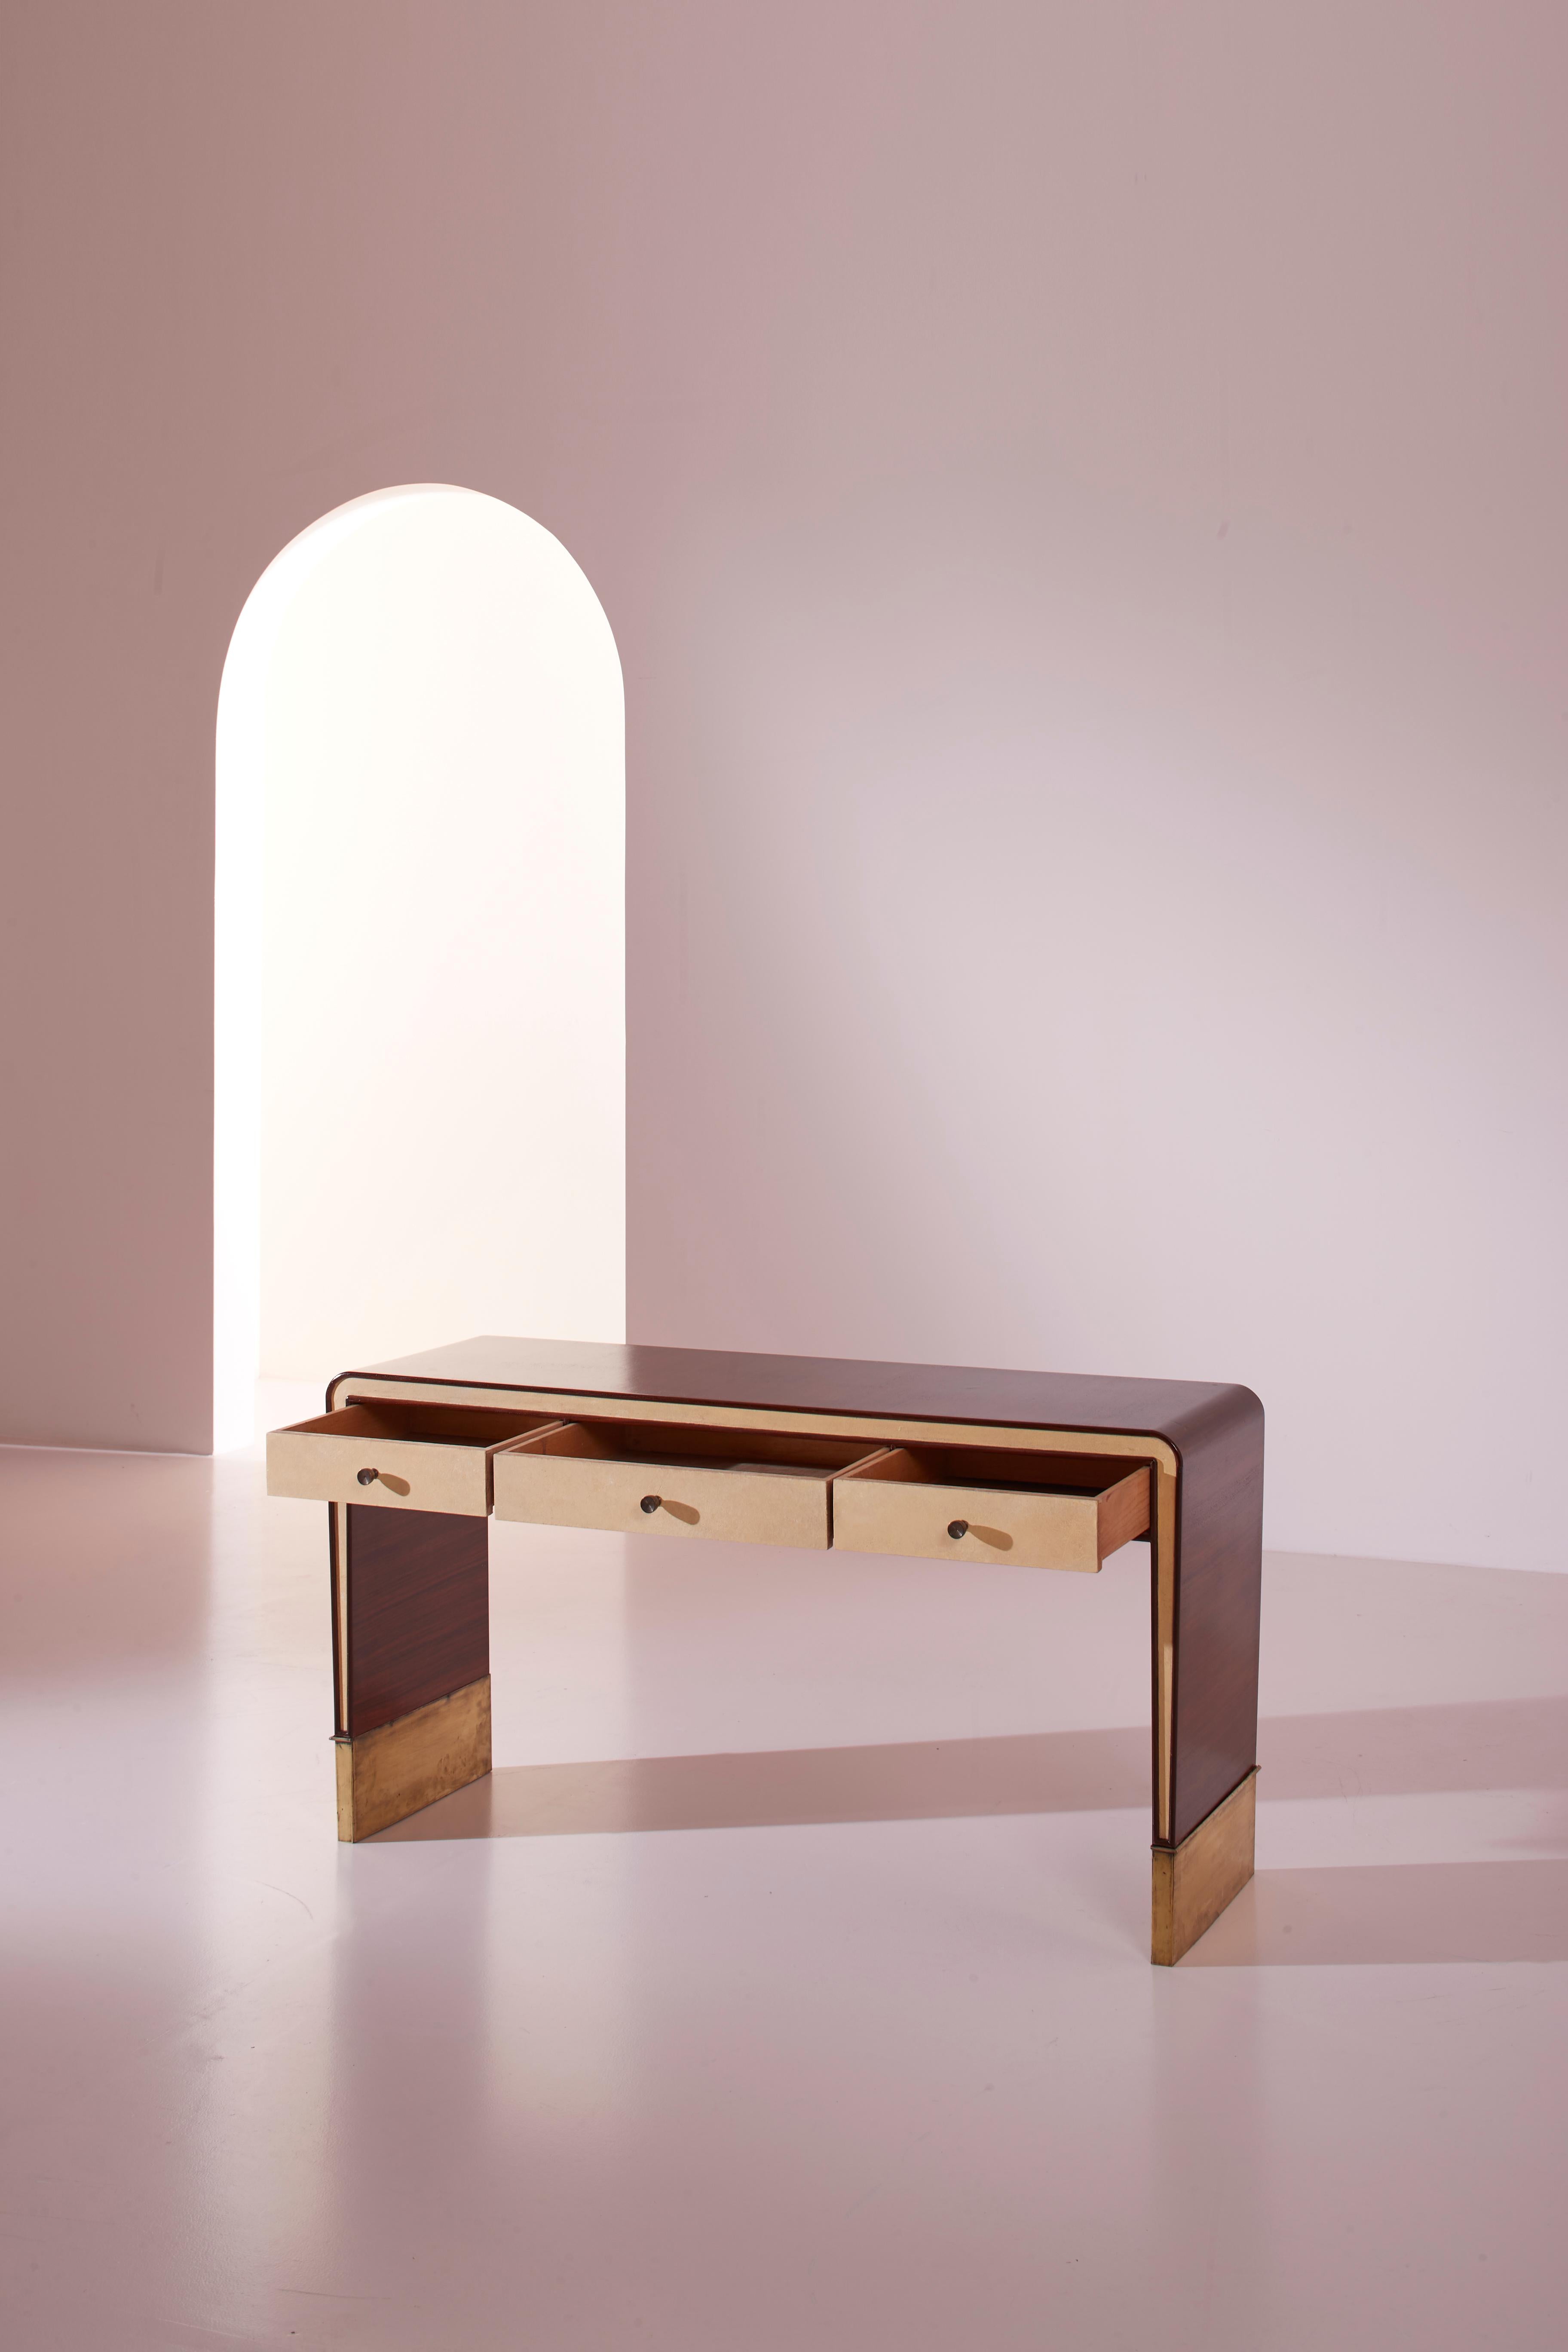 Mid-20th Century Gio Ponti walnut, parchment, and brass console or dressing table, Italy, 1930s For Sale